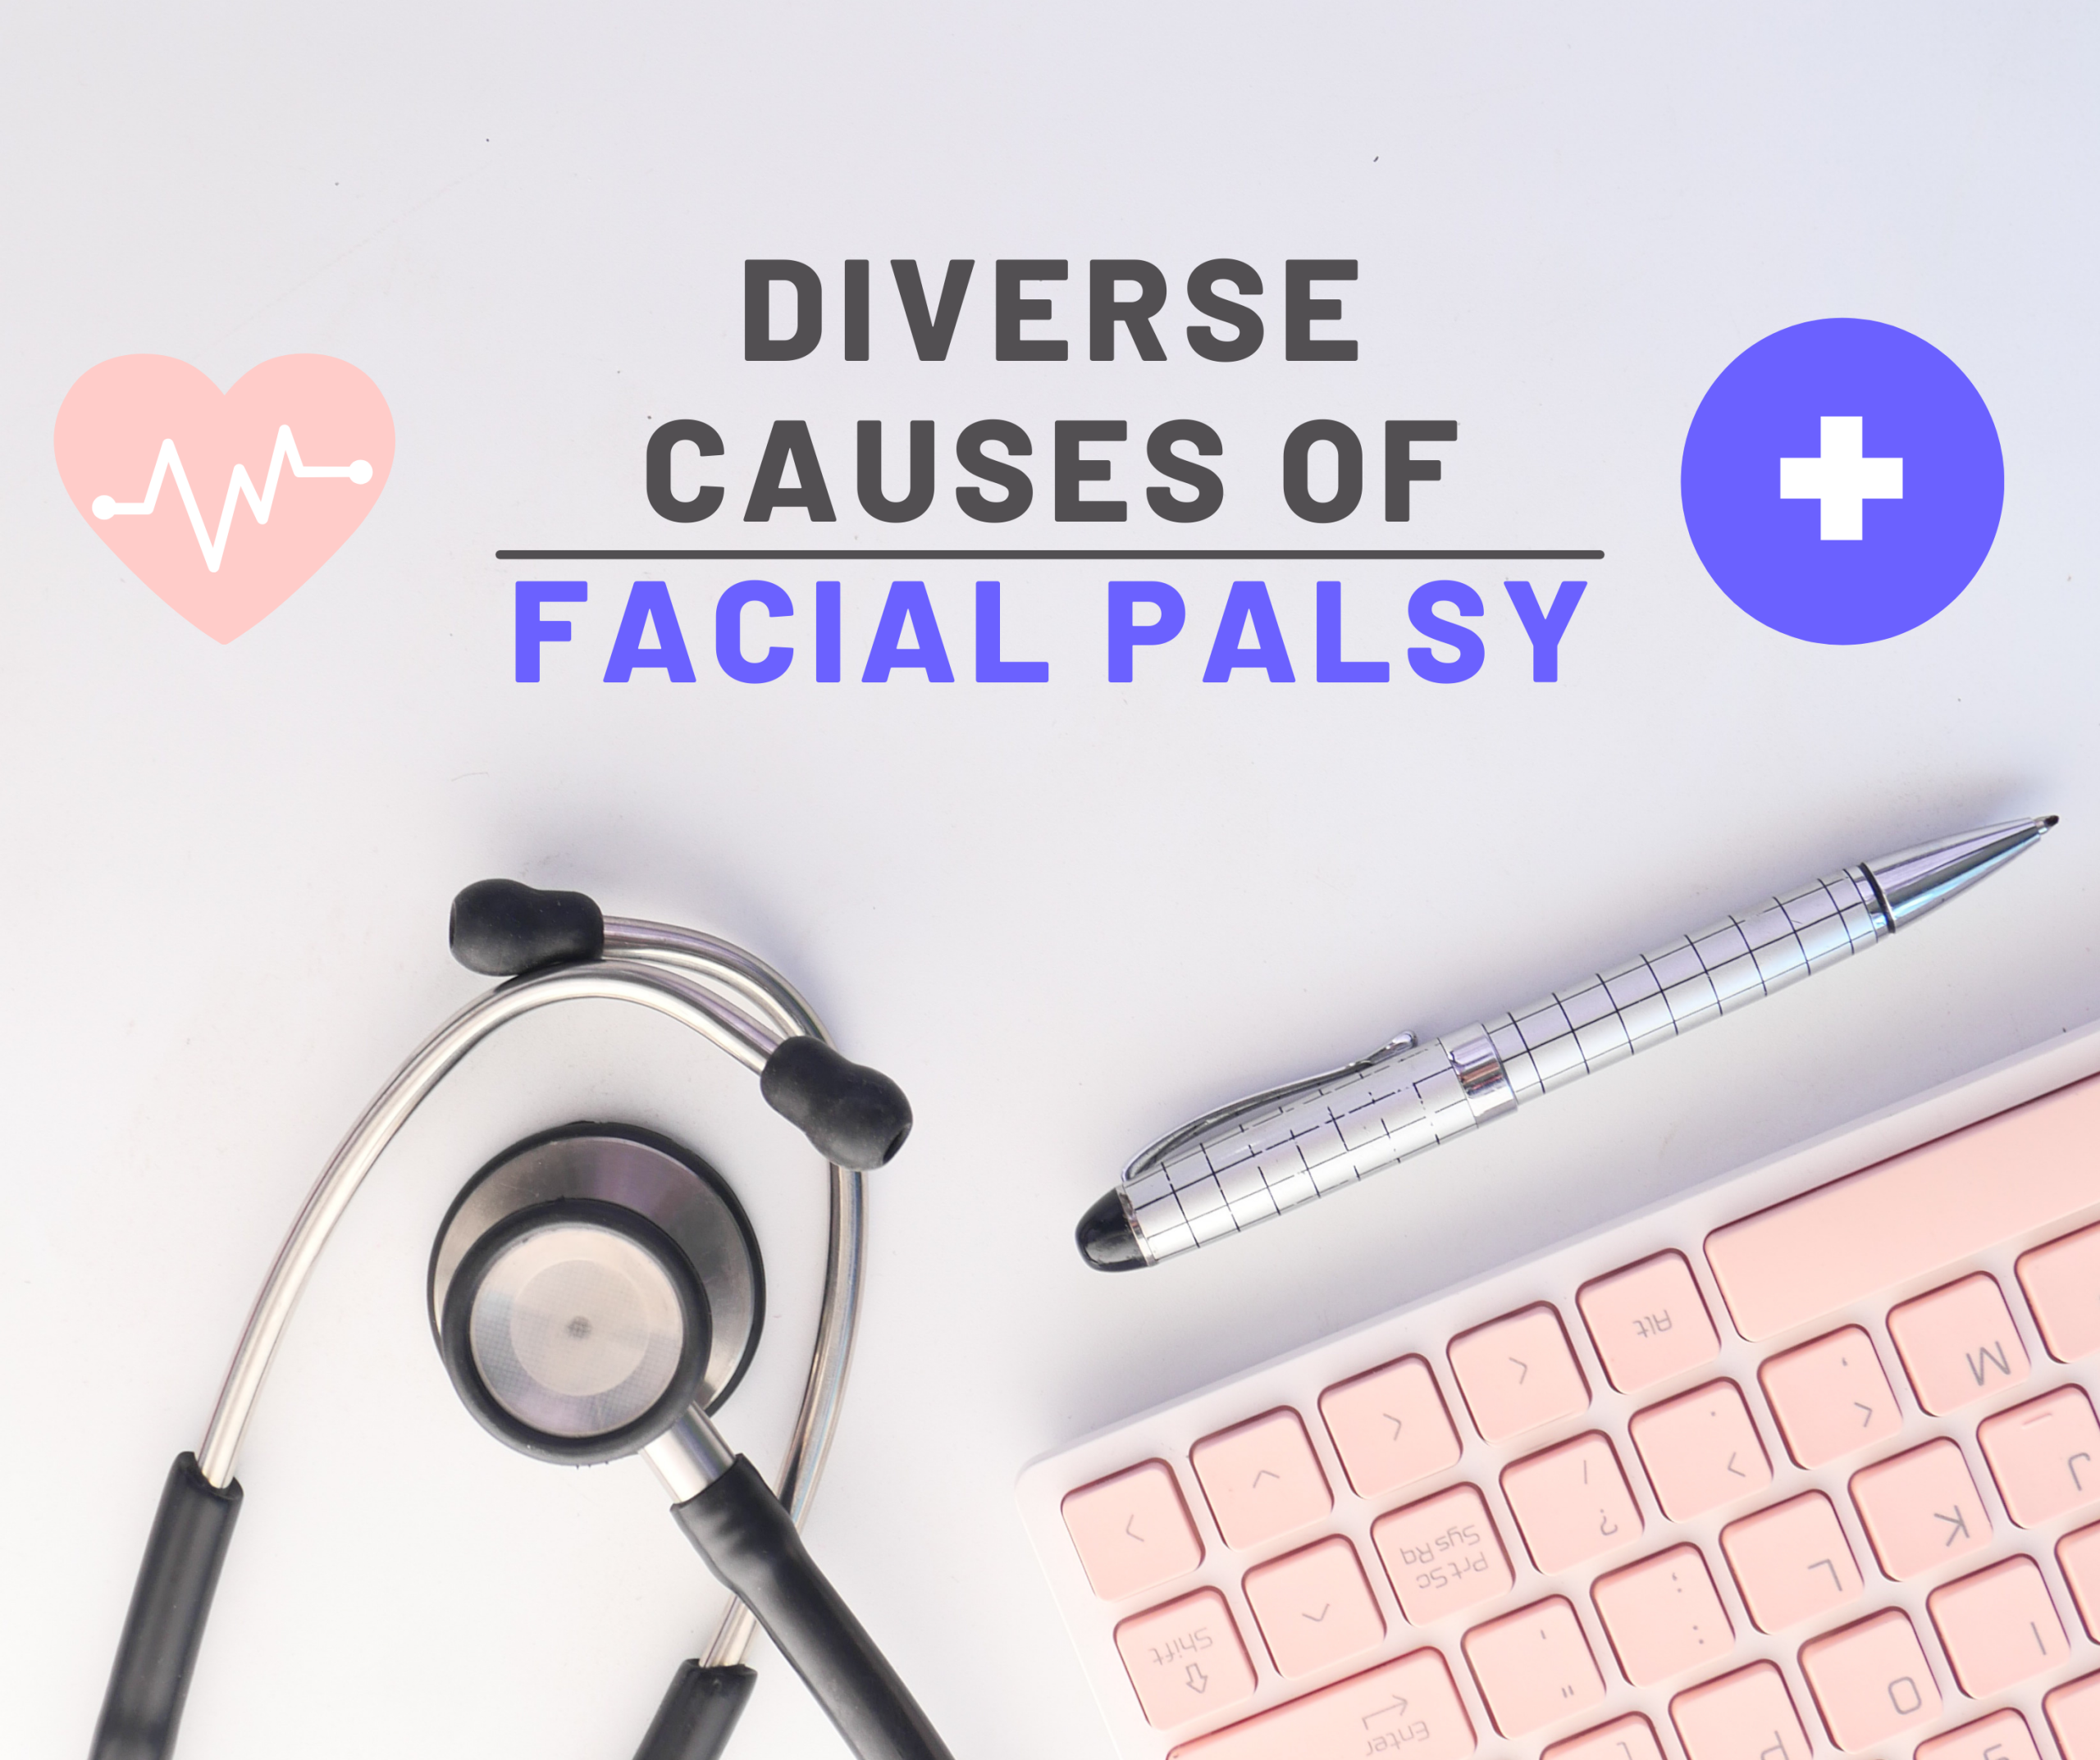 Exploring the Varied Causes and Presentations of Facial Palsy